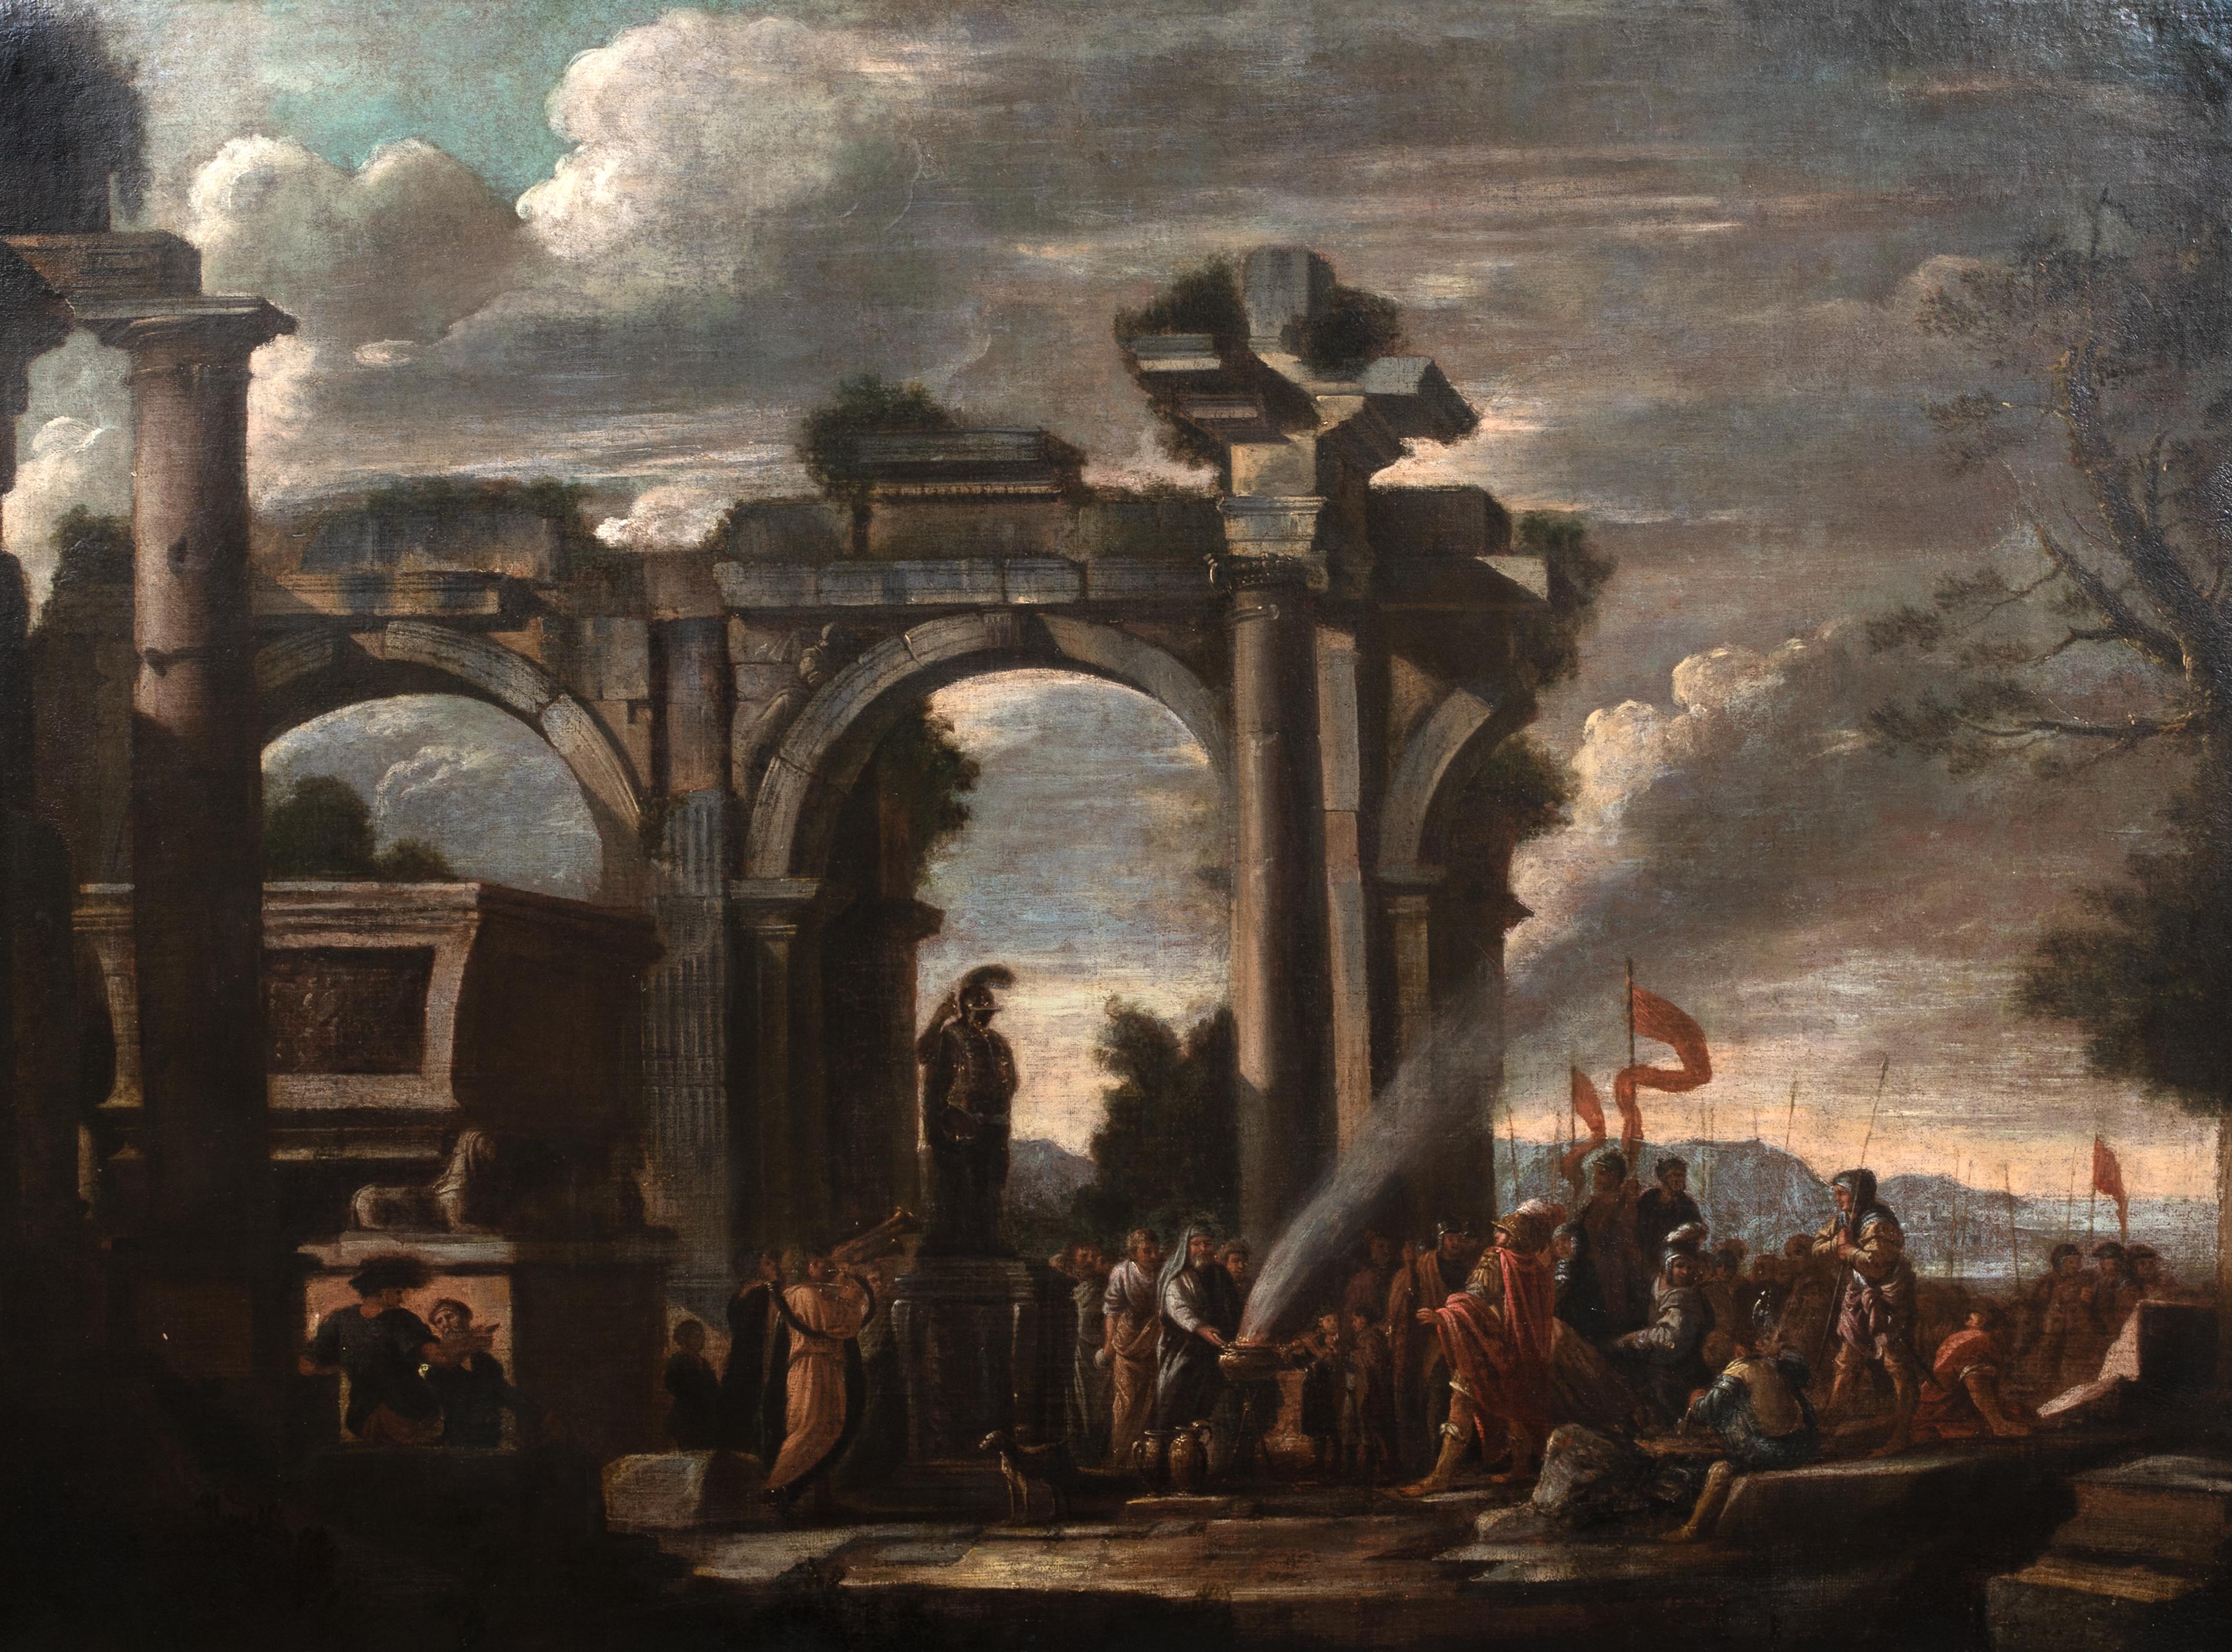 Alexander The Great At The Temple Of Achilles, 18th century

School Of Giovanni Paolo Panini (1691-1765)

Large 18th Century Italian Old Master Architectural Capriccio of Alexander the Great making a sacrifice at the Temple of Achilles. Exceptional